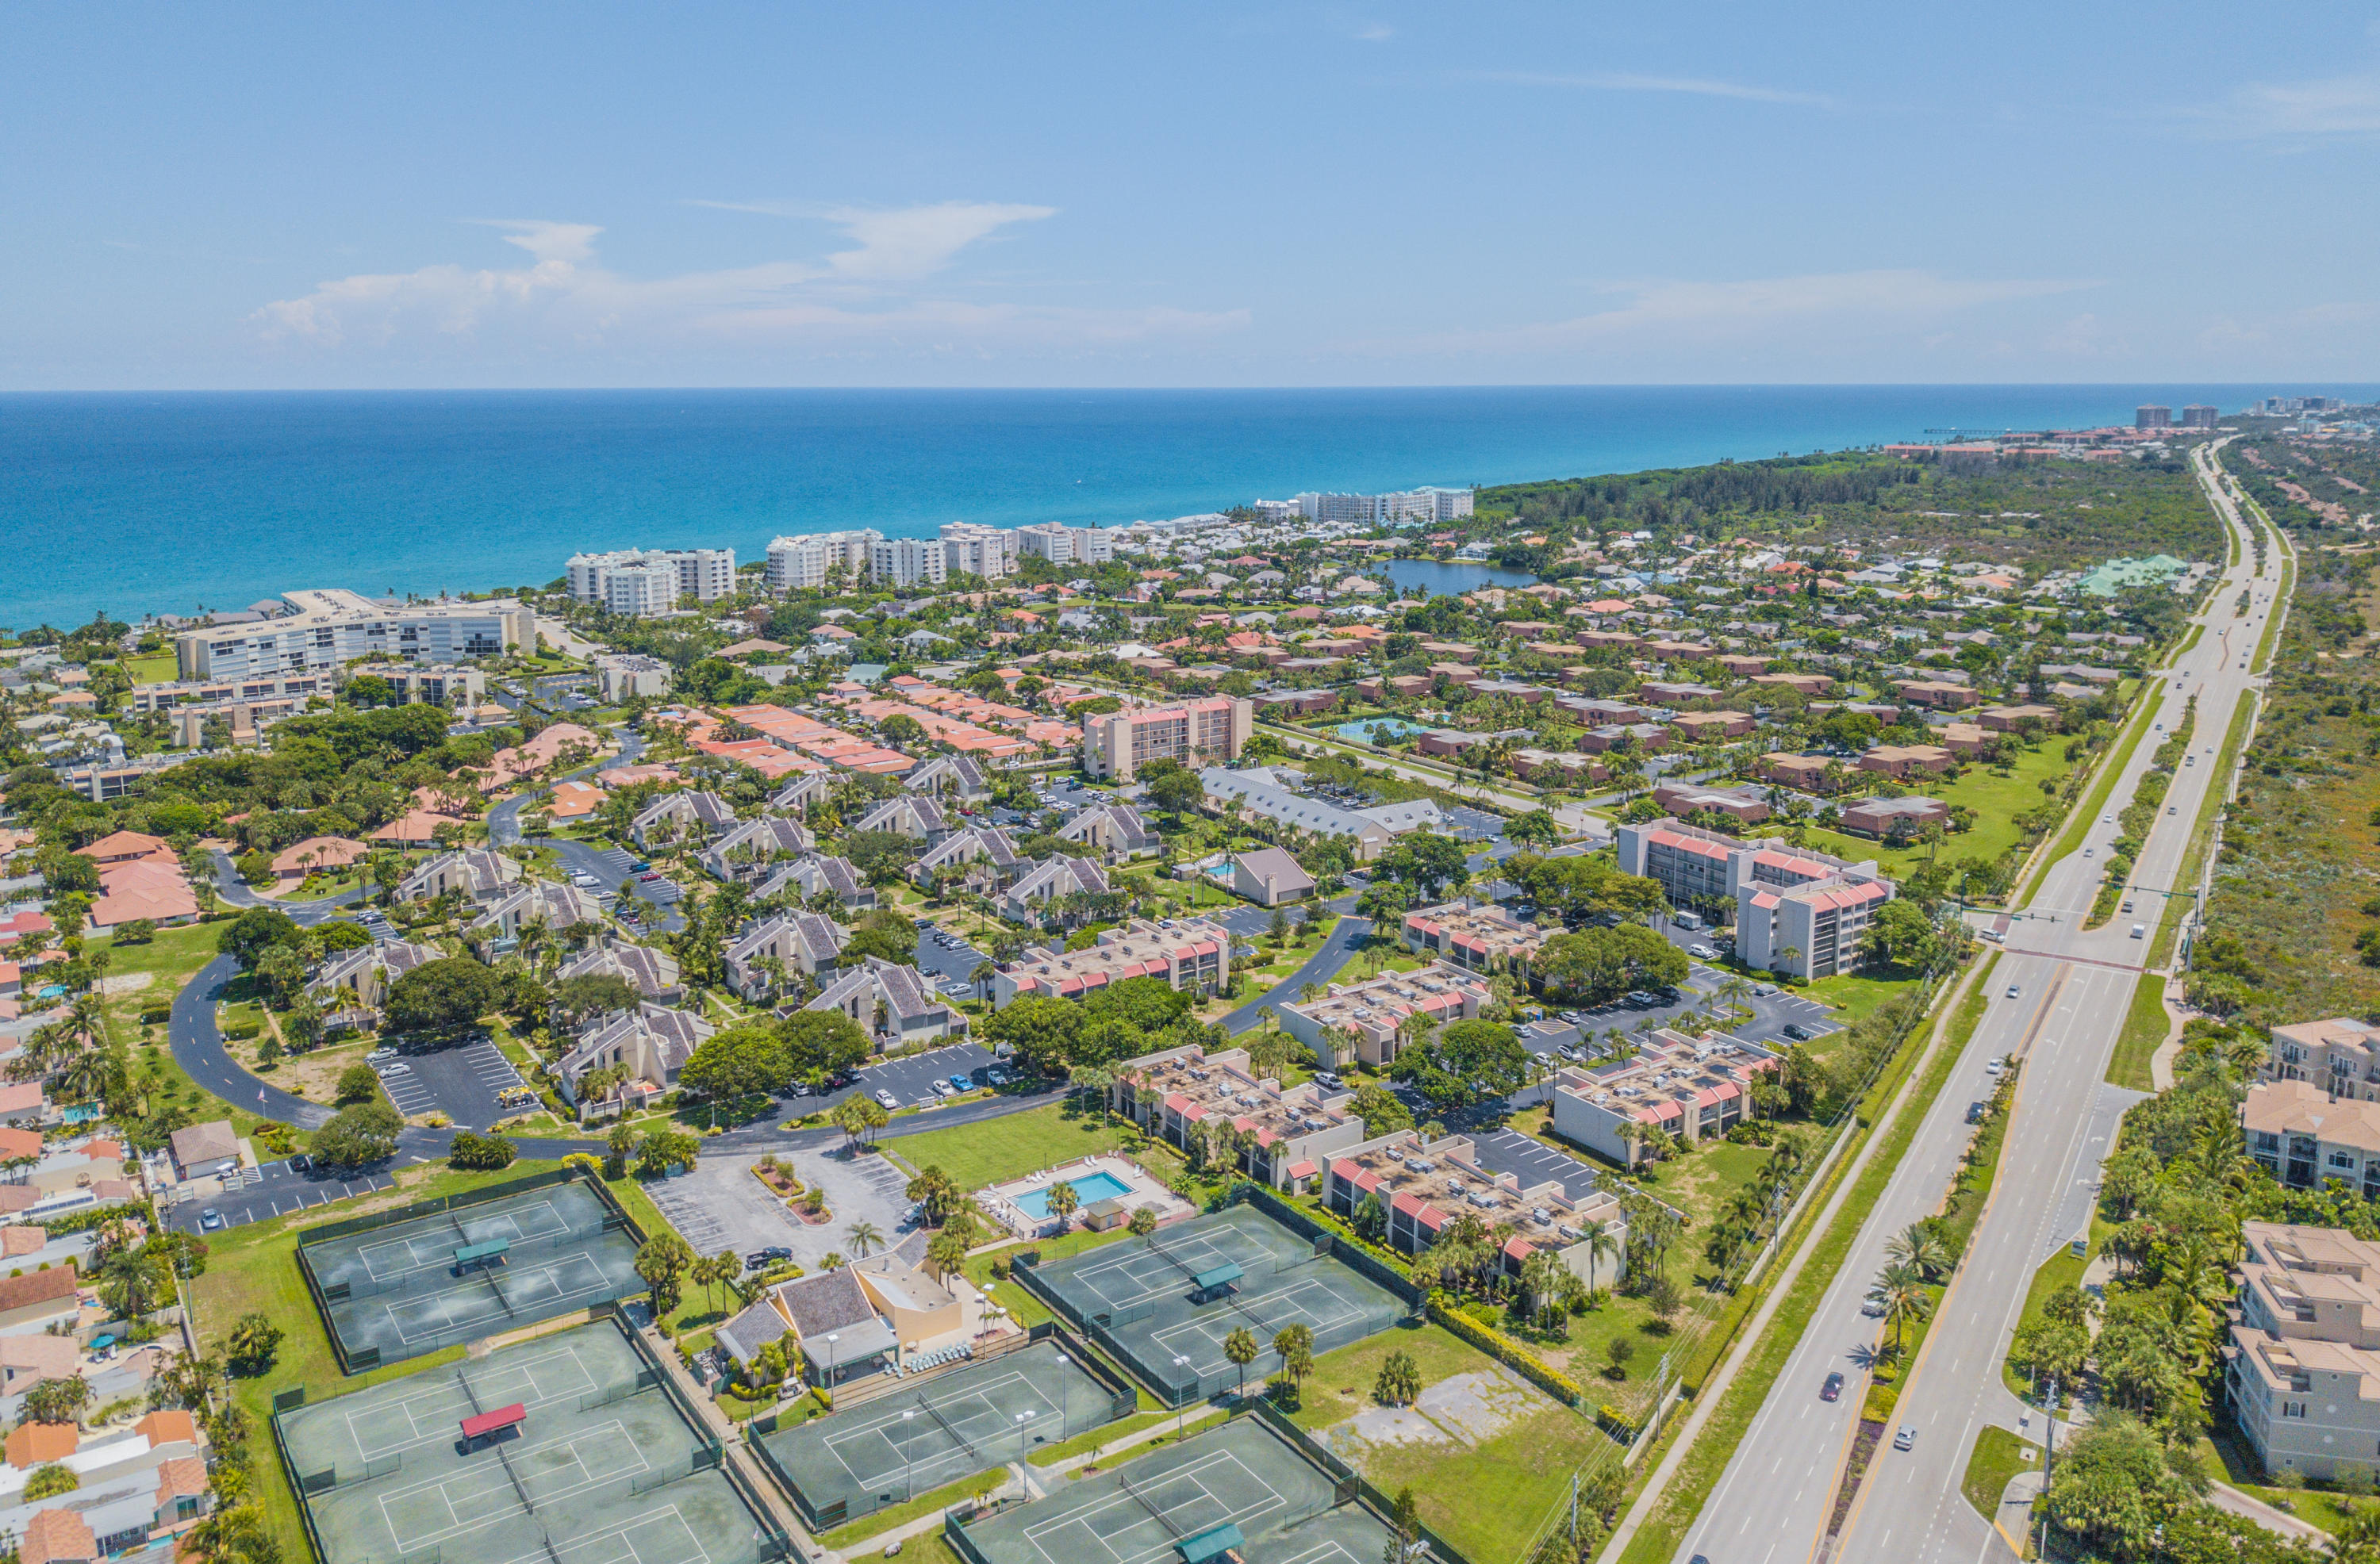 an aerial view of residential building and ocean